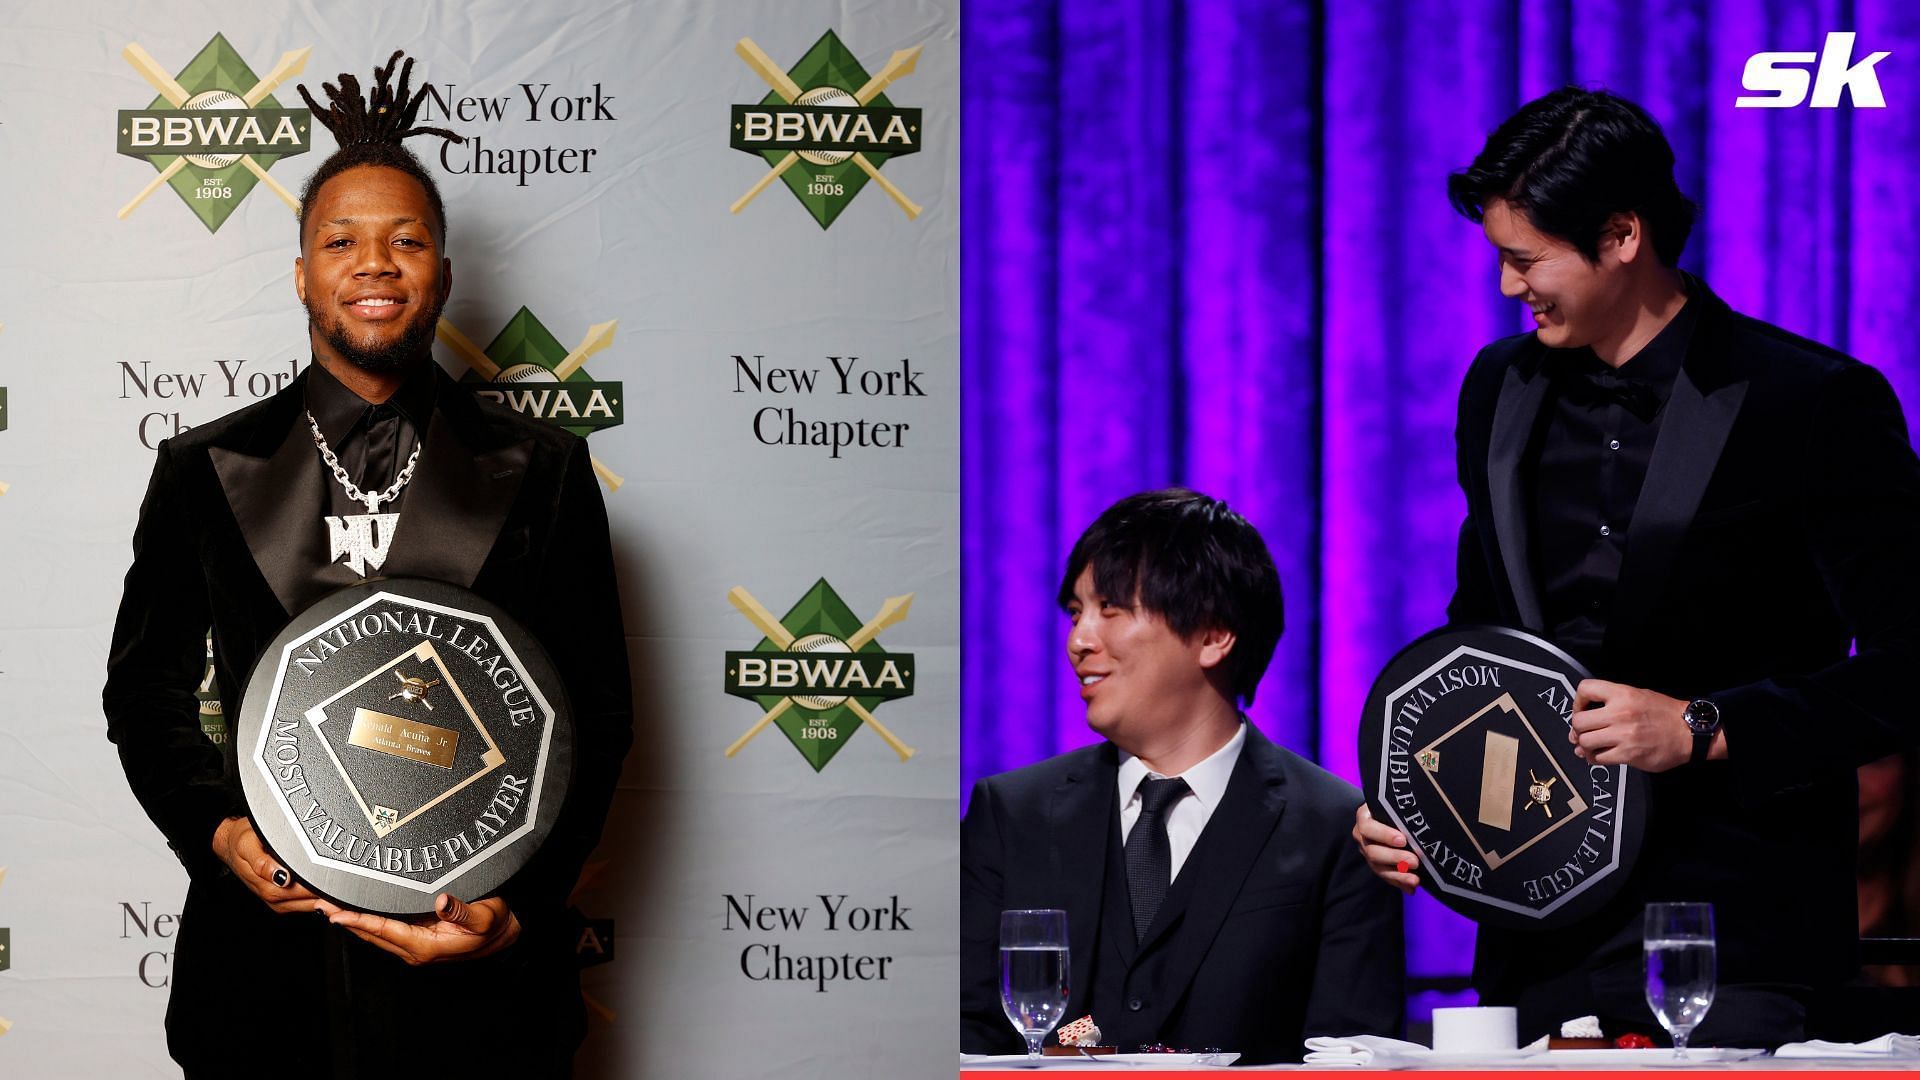 Ronald Acu&ntilde;a Jr. was honored alongside Shohei Ohtani at the BBWAA dinner in NYC